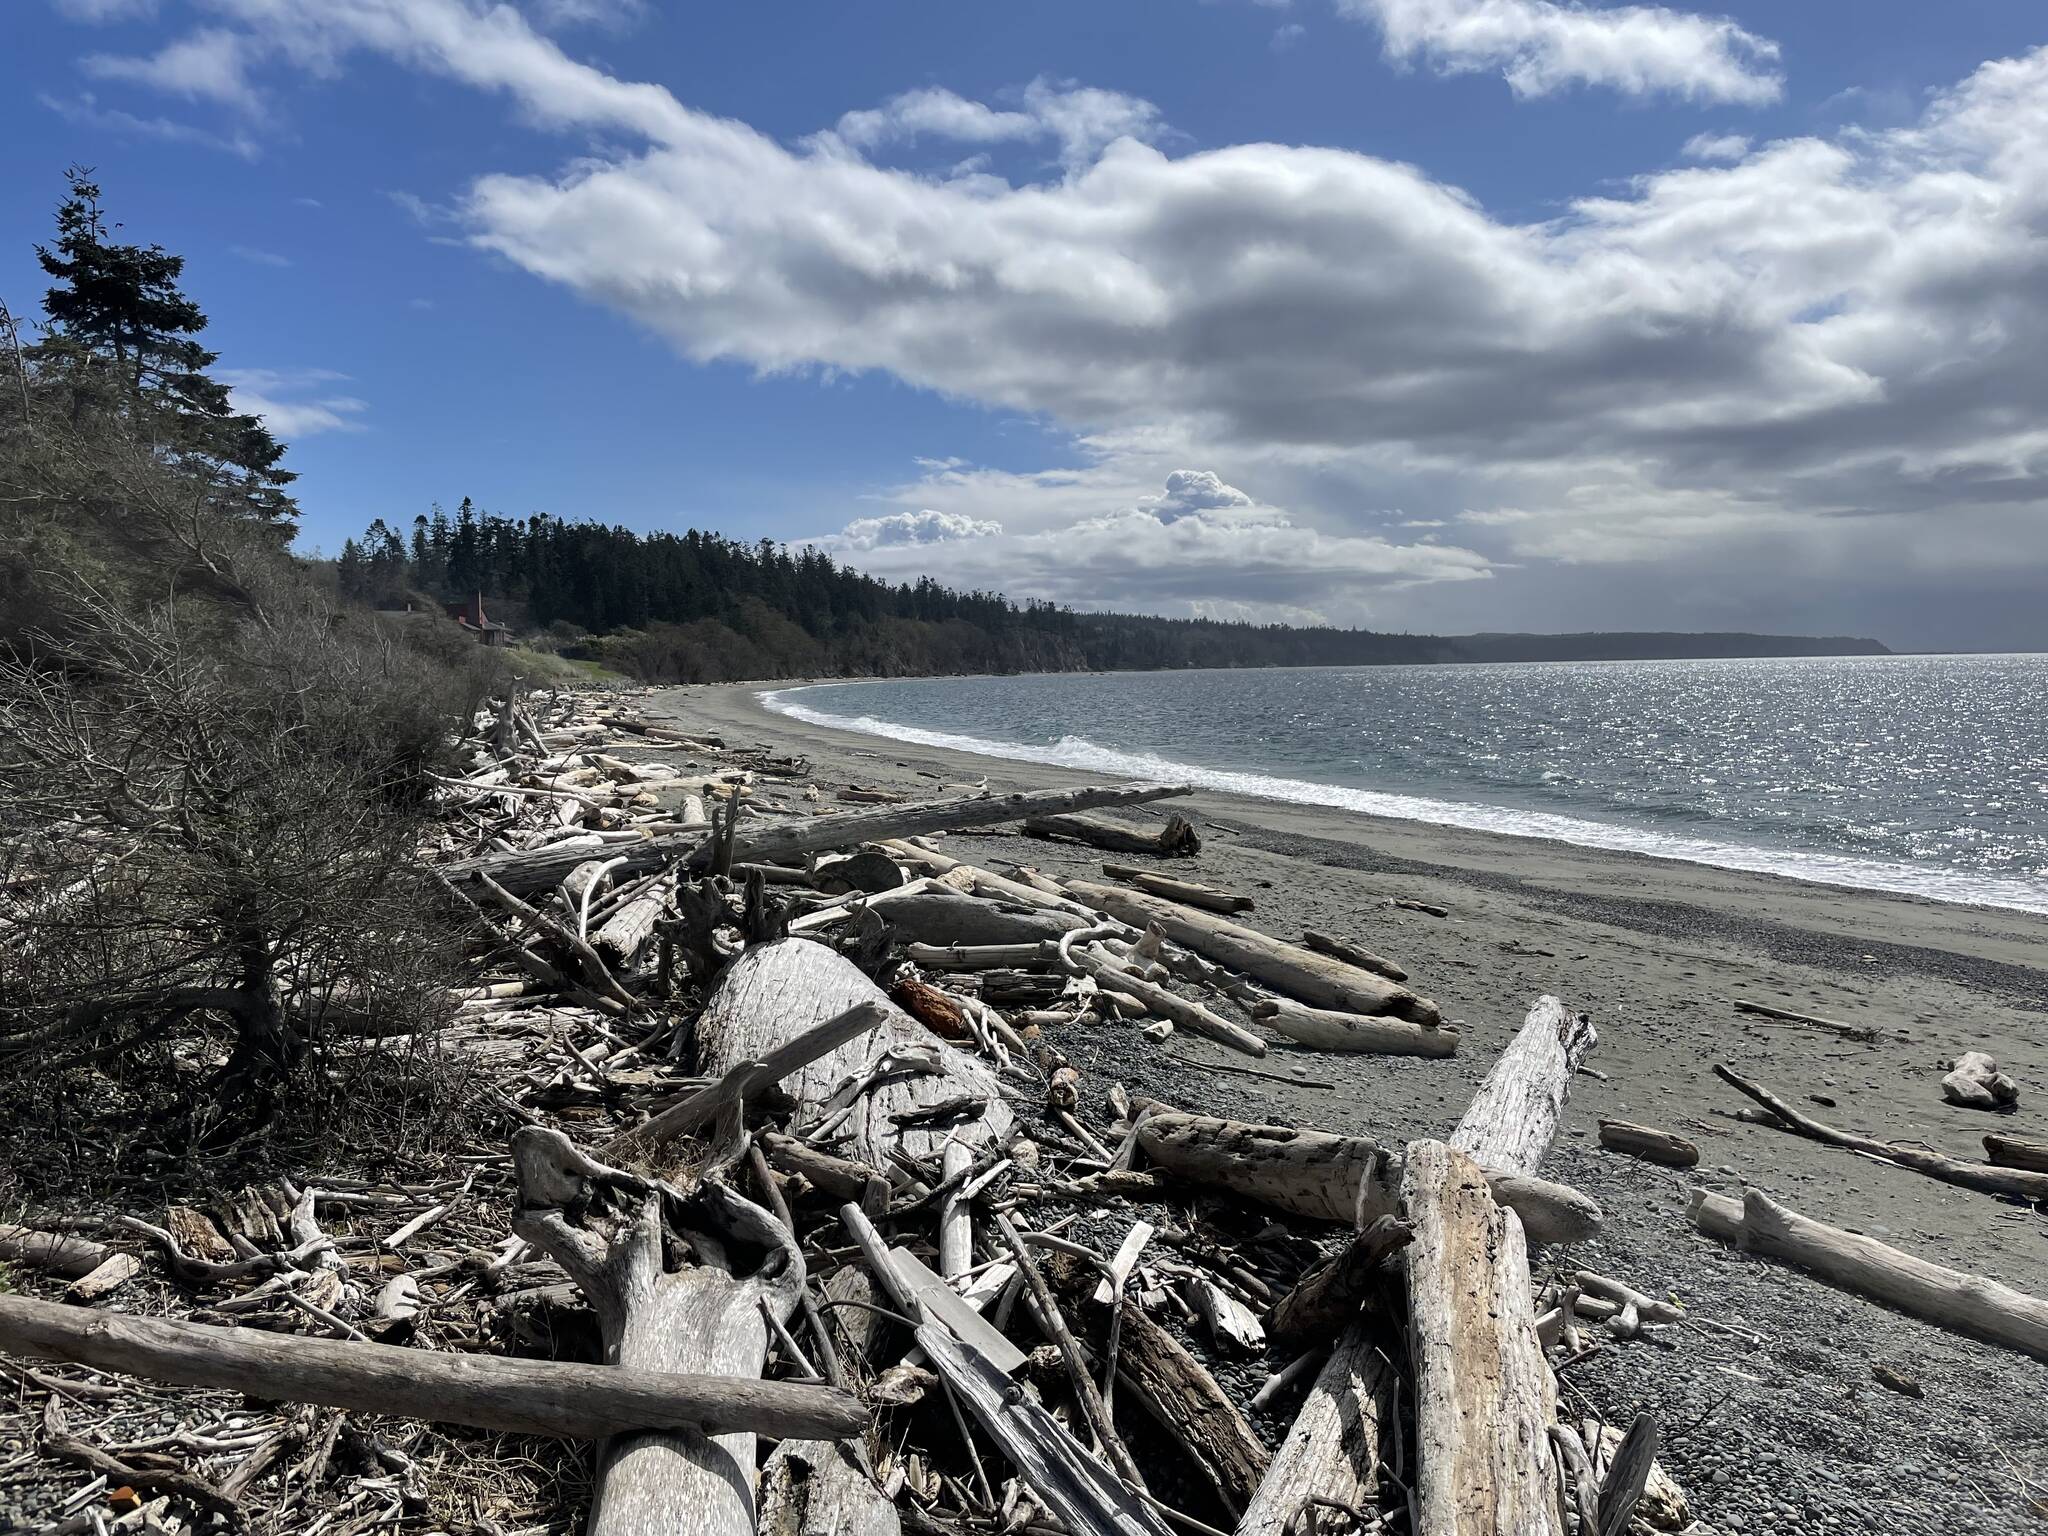 Whidbey Camano Land Trust photo
This beach on Admiralty Bay near the Coupeville ferry will soon be publicly accessible, as the Whidbey Camano Land Trust recently purchased the property for preservation.